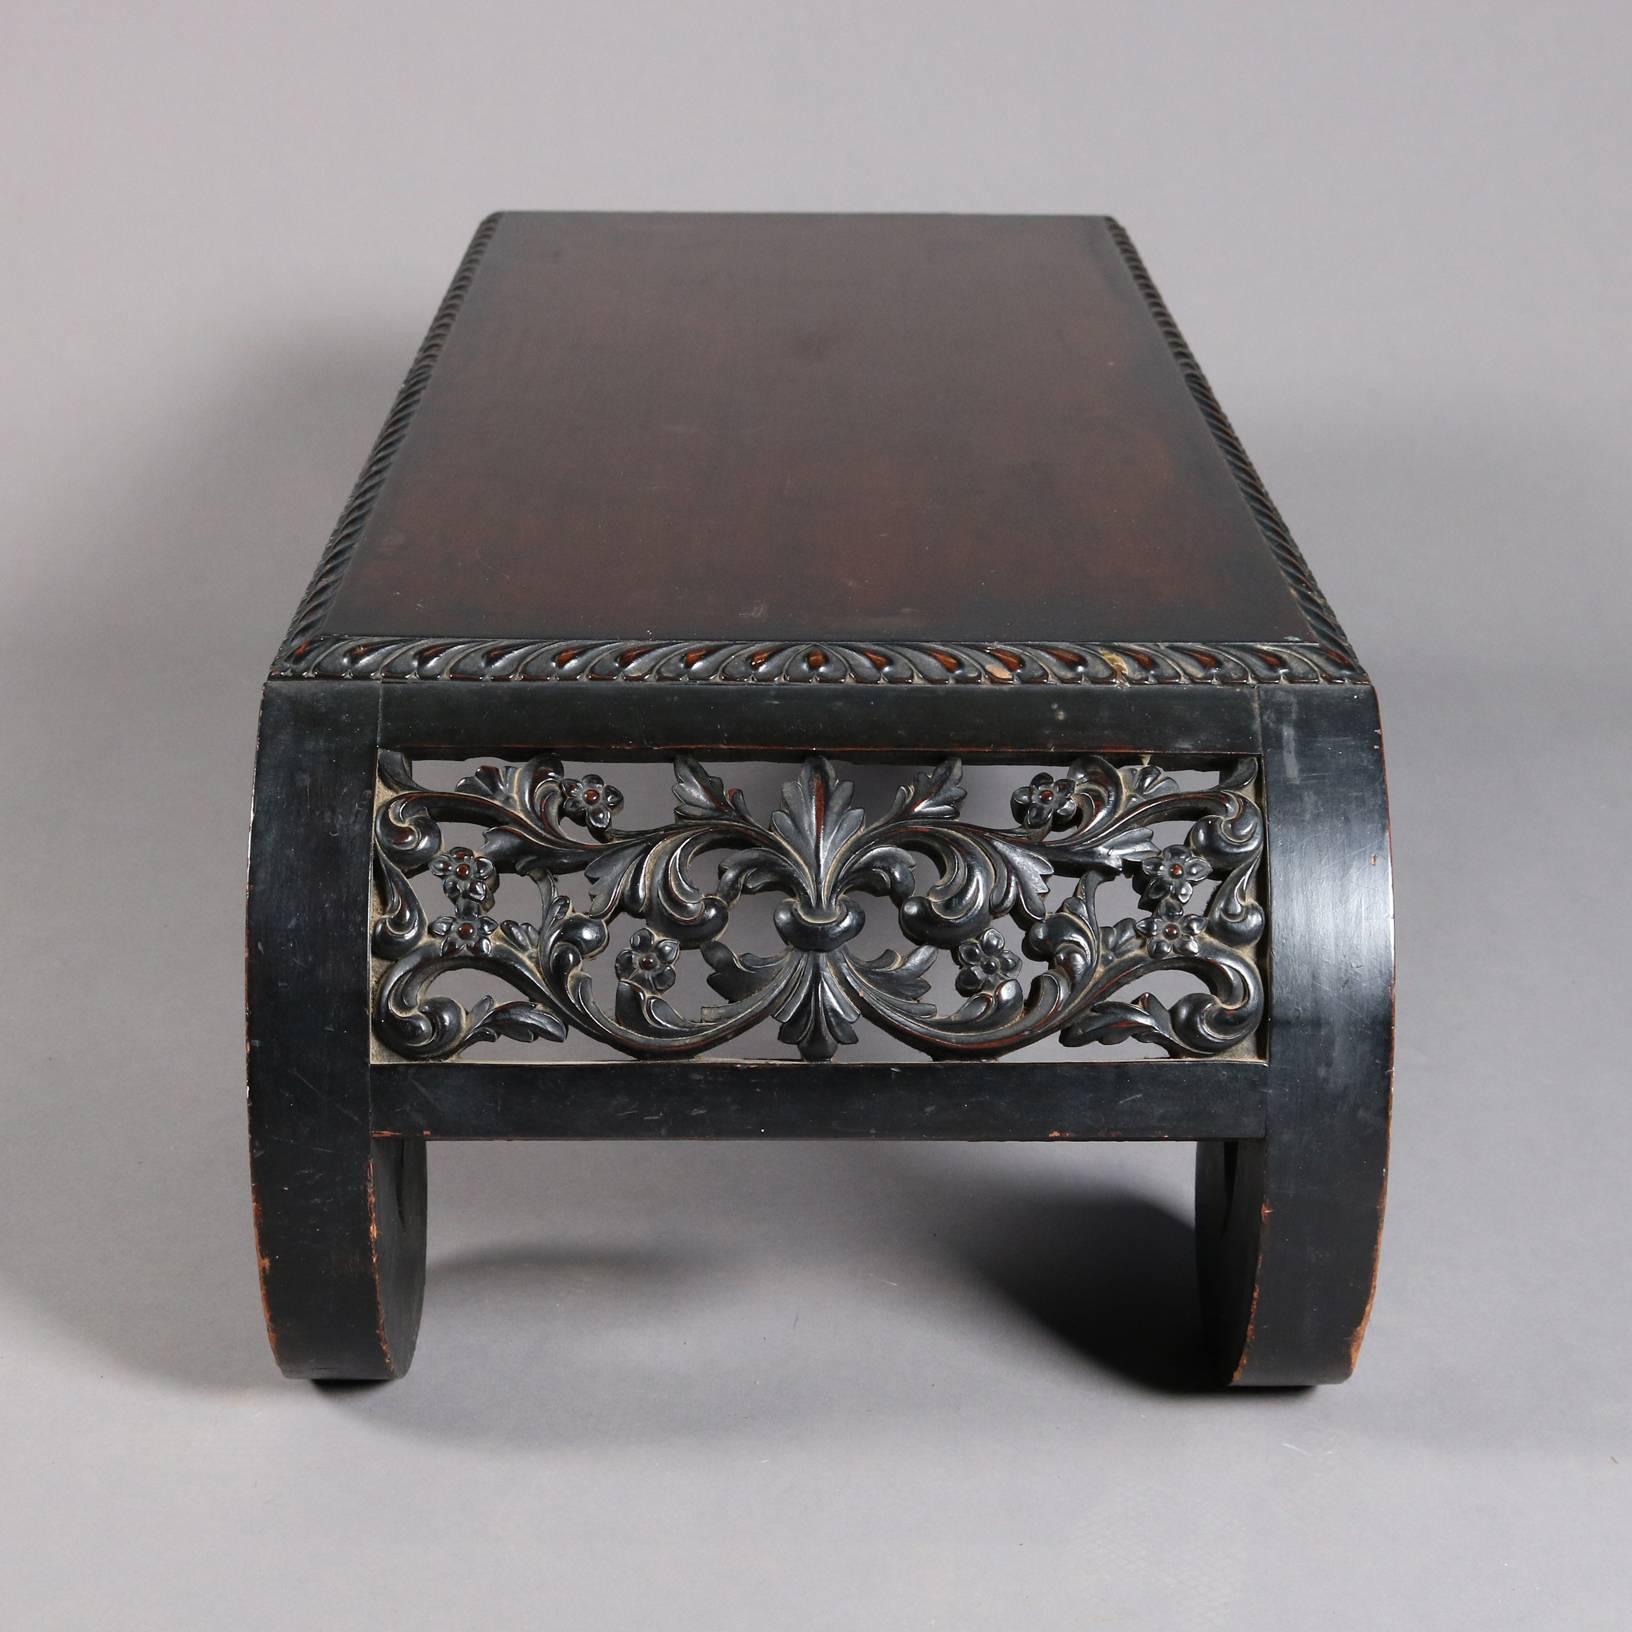 Hardwood Antique Chinese Heavily Carved and Ebonized Tea Table, 20th Century